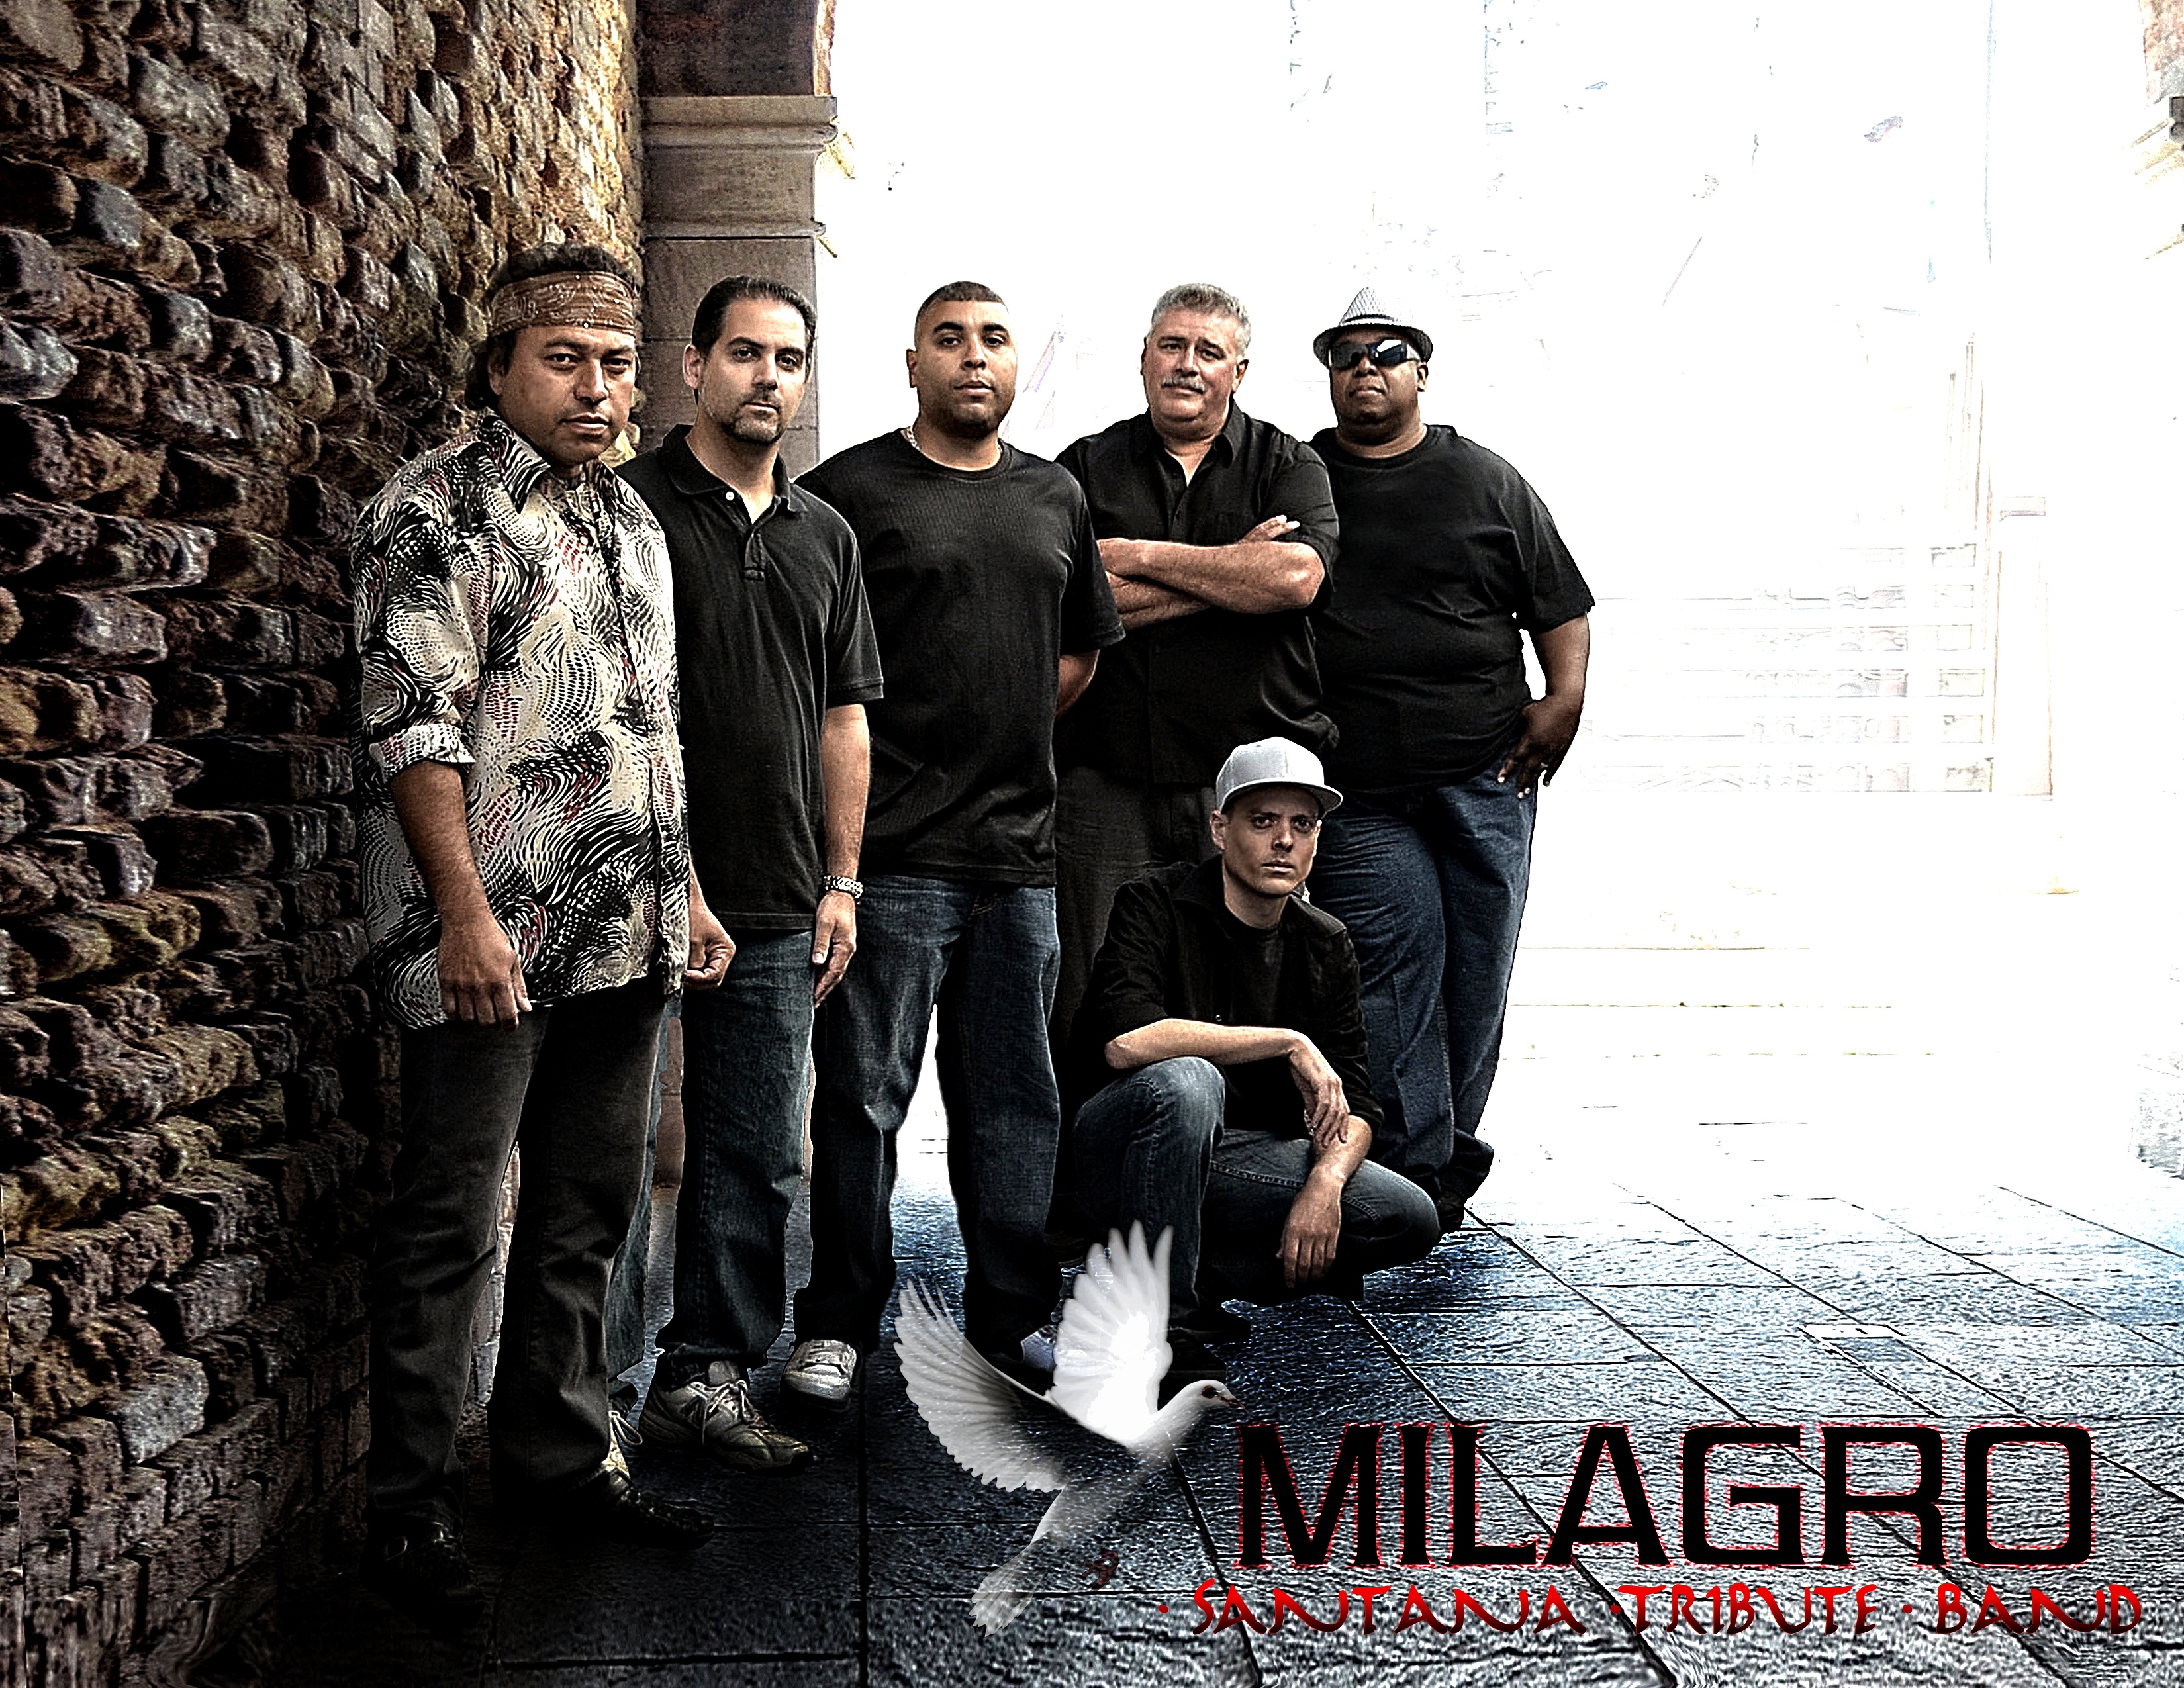 A photo of the members of the band Milagro.